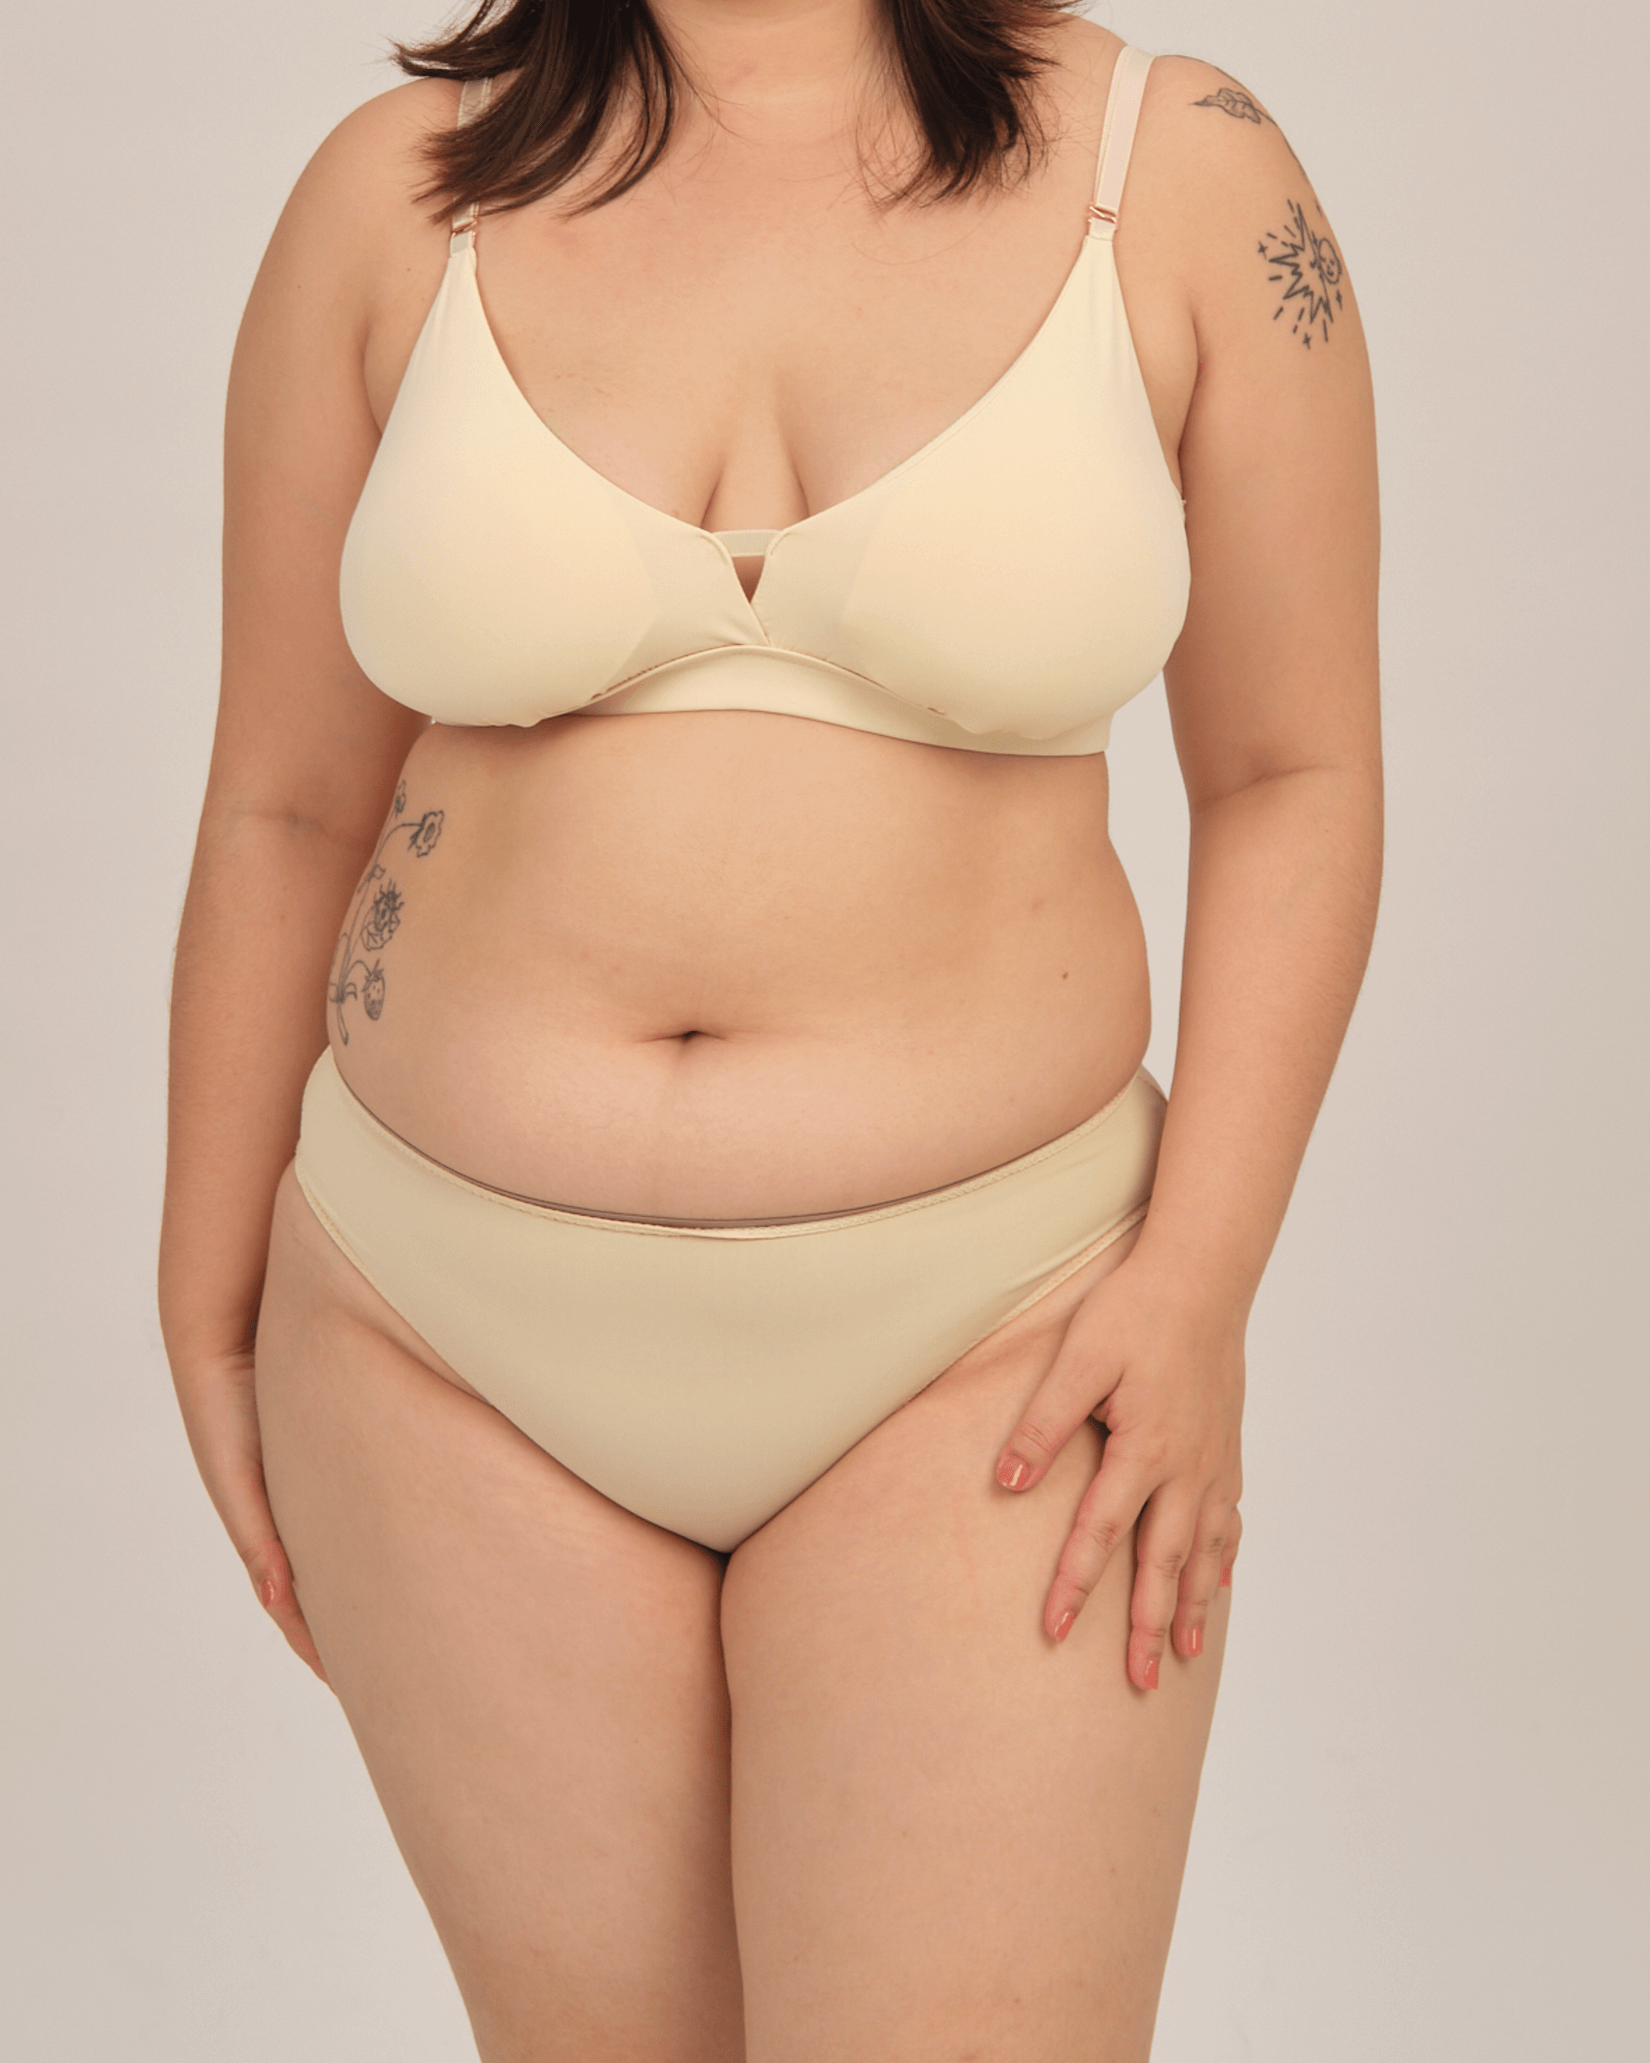 elevated basics panty in #14 – Our Bralette Club